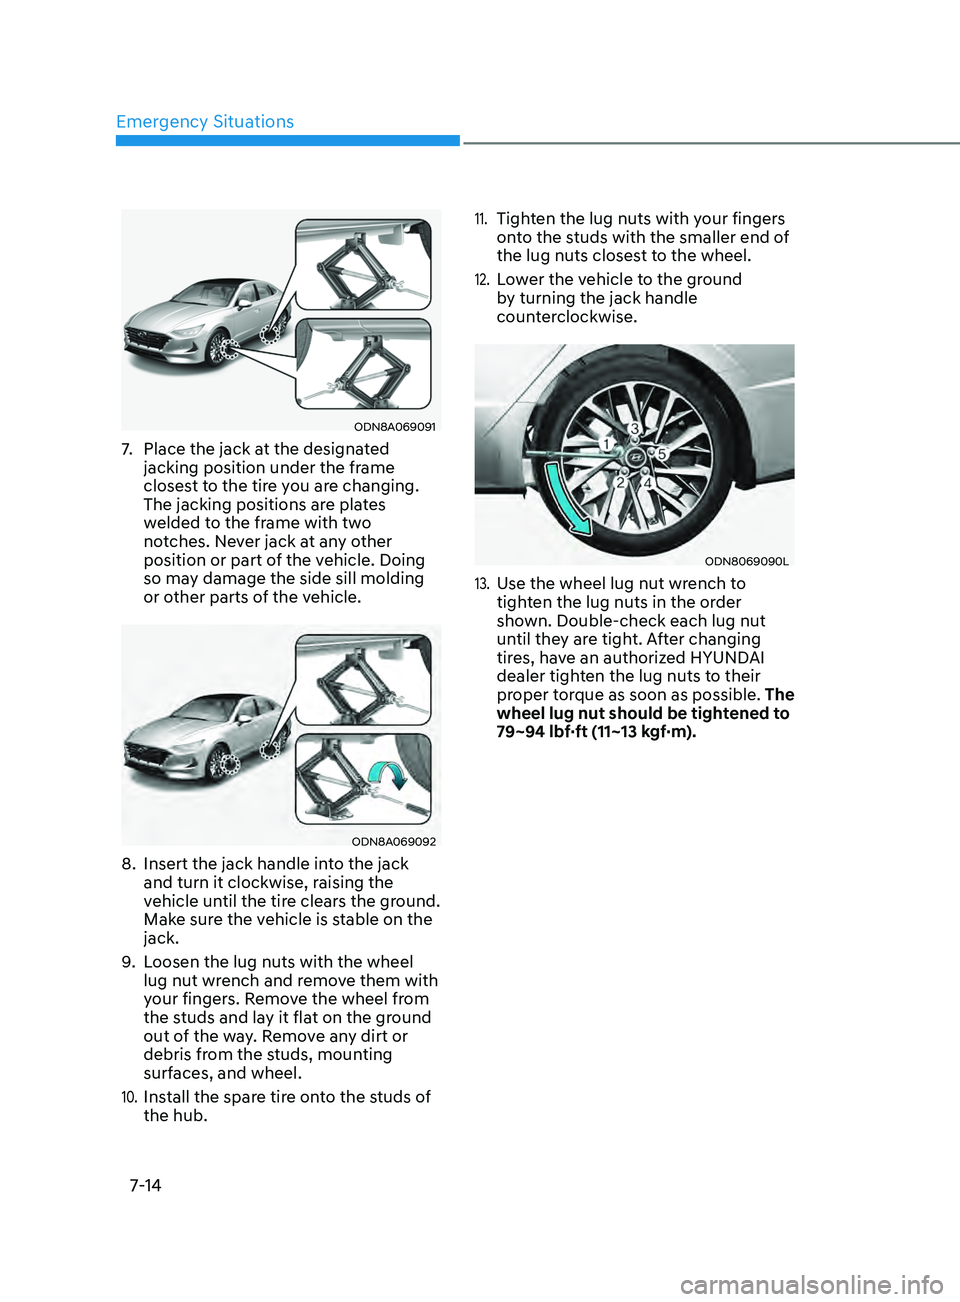 HYUNDAI SONATA LIMITED 2022  Owners Manual Emergency Situations
7-14
ODN8A069091
7. Place the jack at the designated 
jacking position under the frame 
closest to the tire you are changing. 
The jacking positions are plates 
welded to the fram